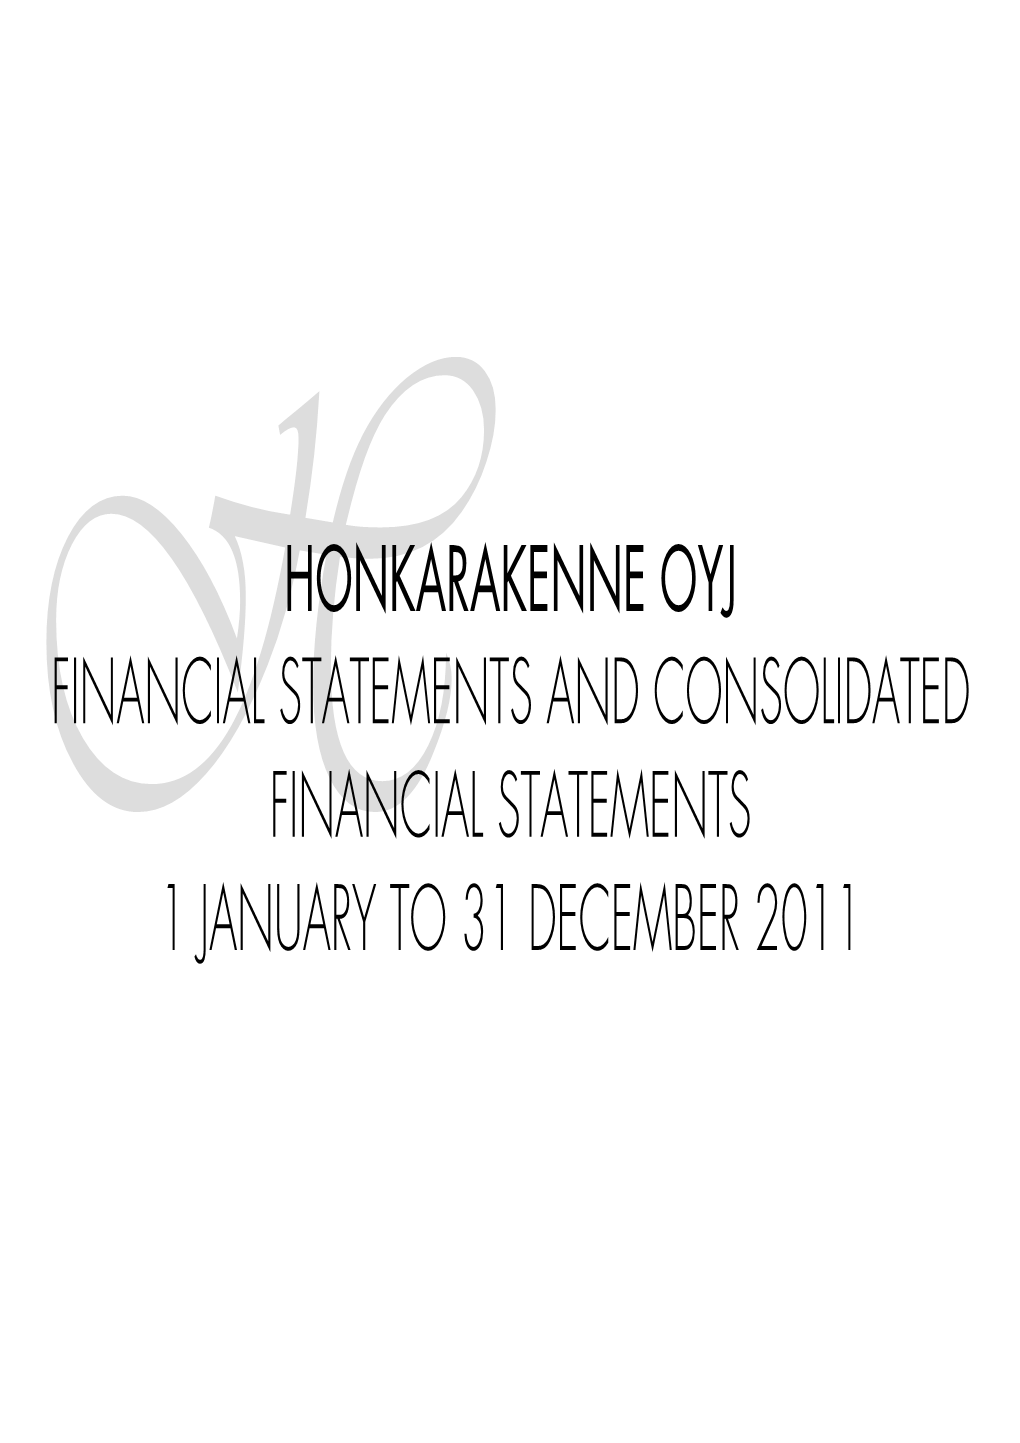 Honkarakenne Oyj Financial Statements and Consolidated Financial Statements 1 January to 31 December 2011